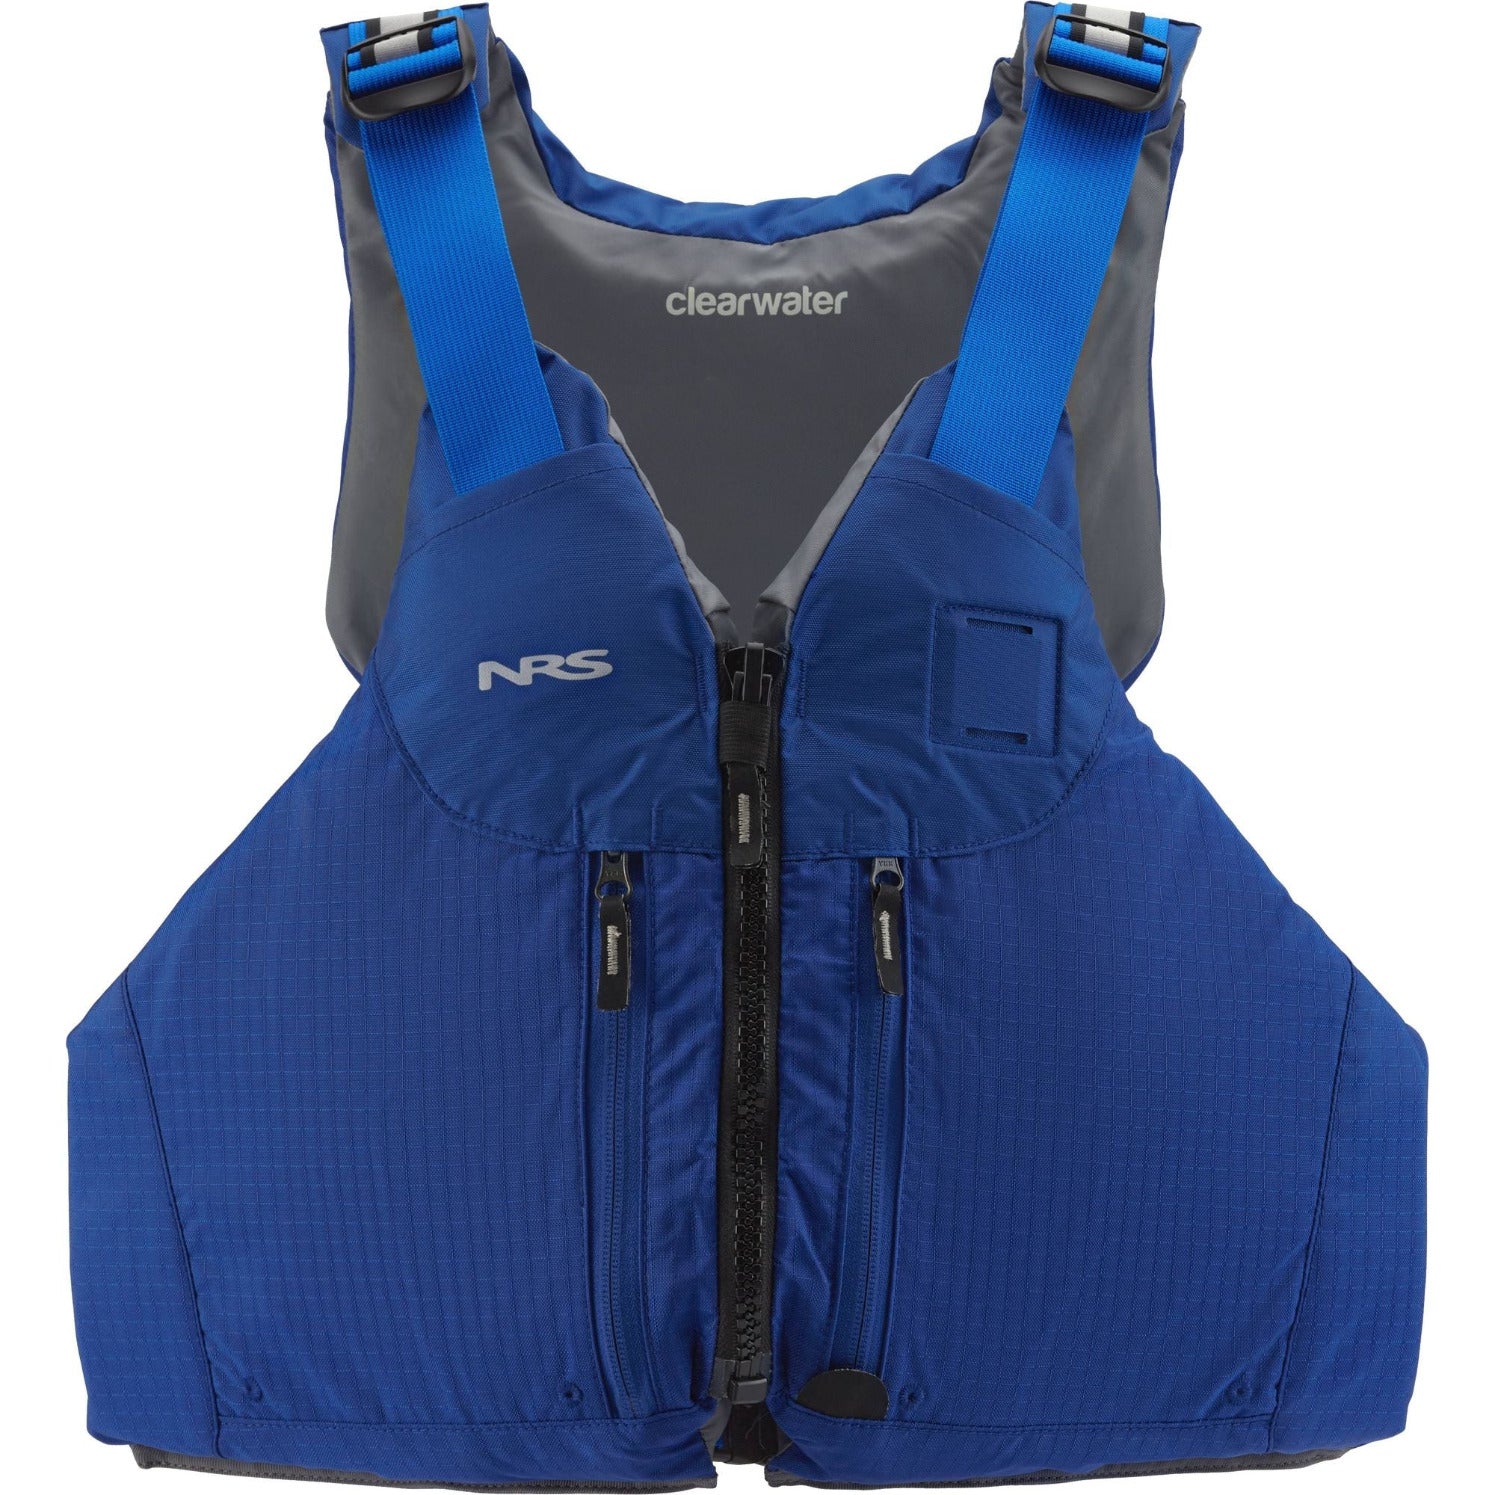 NRS Clearwater High Back PFDs for Kayaking